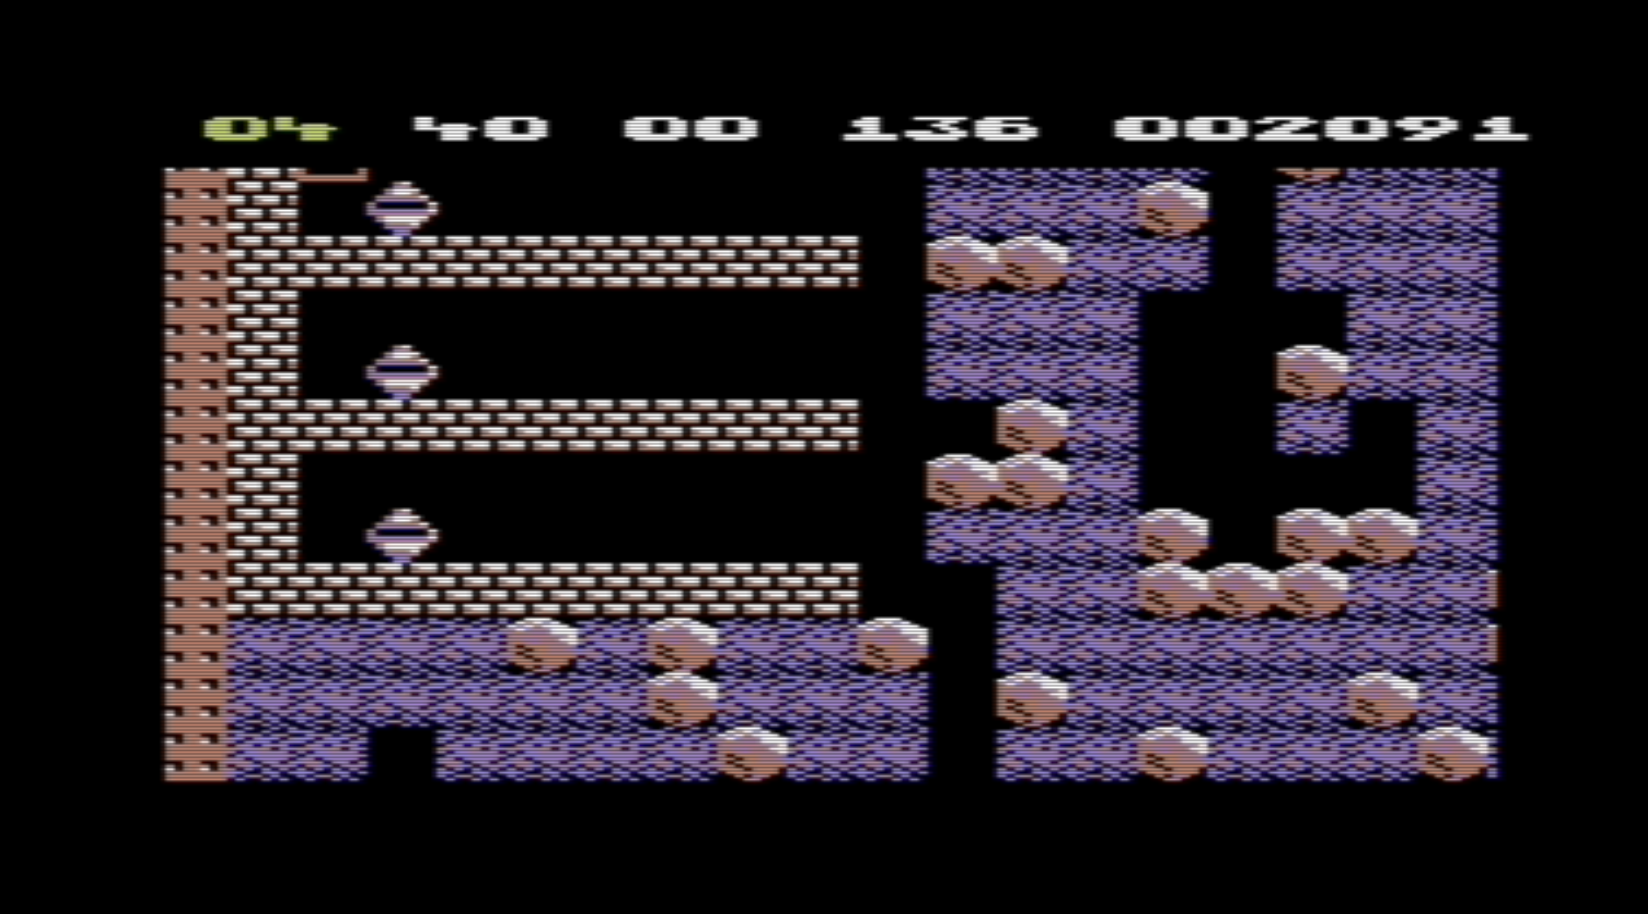 ClausLarsen: Boulder Dash (Commodore 64 Emulated) 2,091 points on 2014-04-17 13:55:10